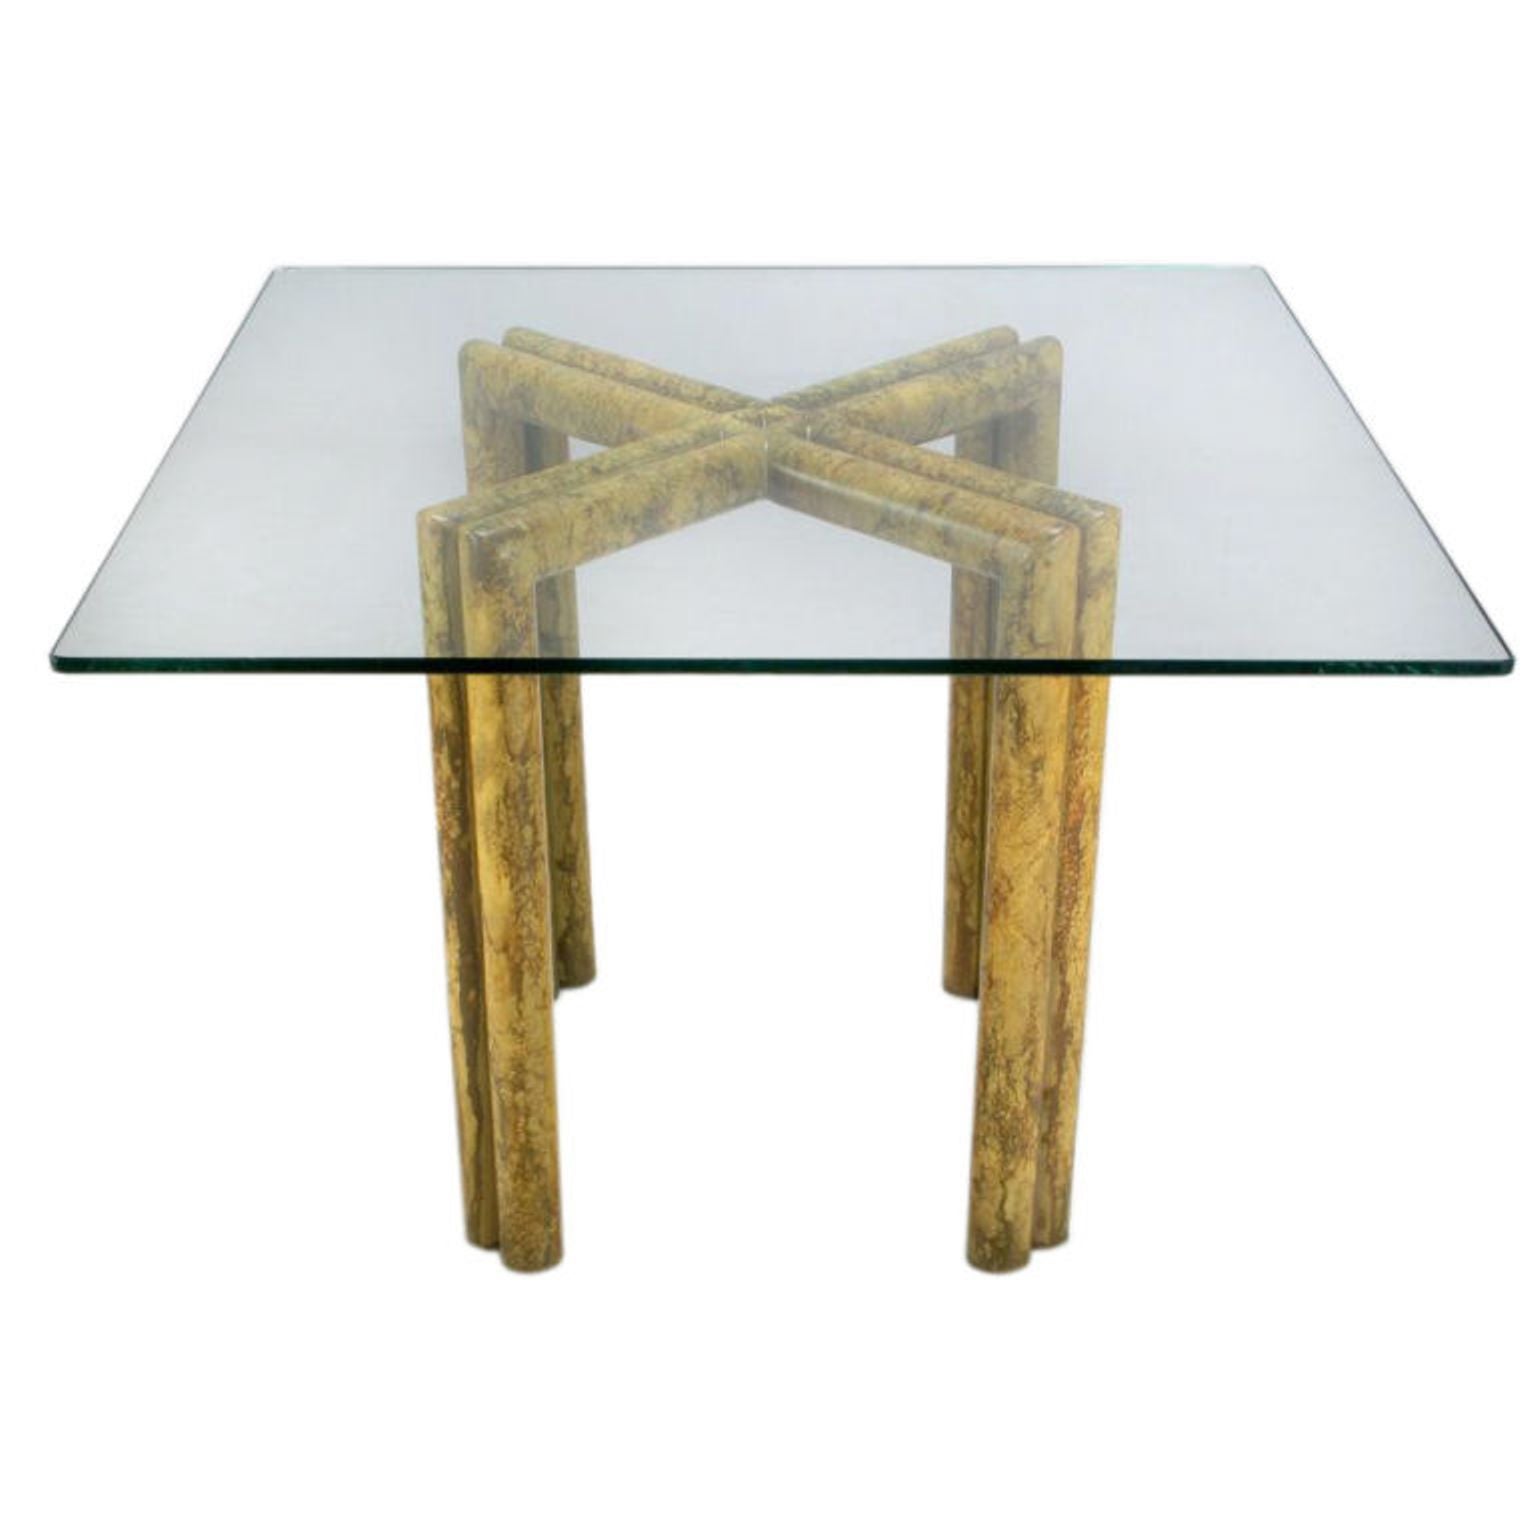 Phyllis Morris Saltire Base Dining Table In Oil-Drop Lacquer 